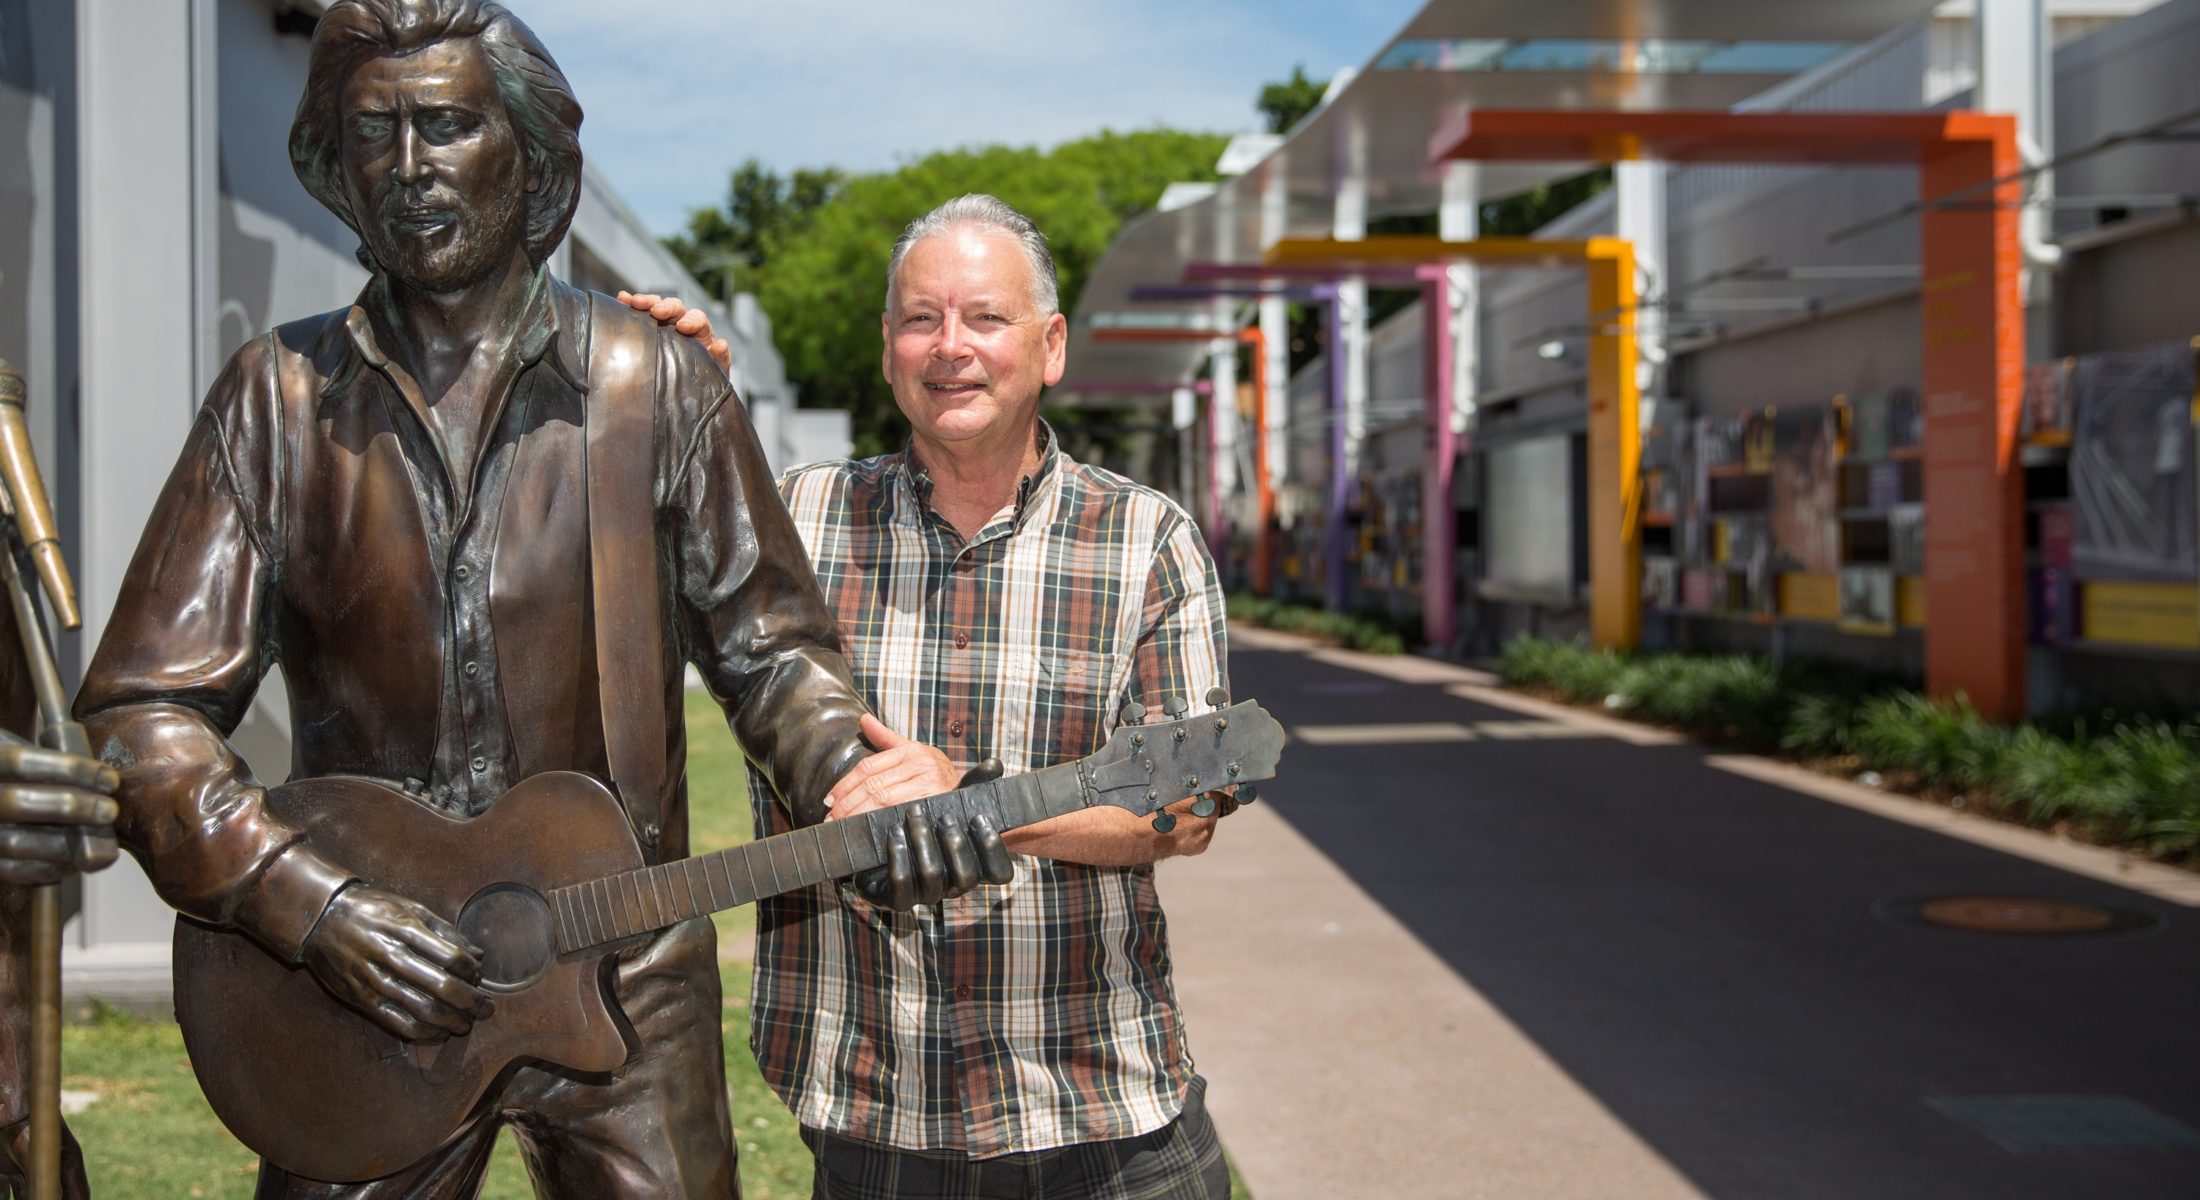 Bee Gees Way Barry Gibb Statue Redcliffe In Moreton Bay Region